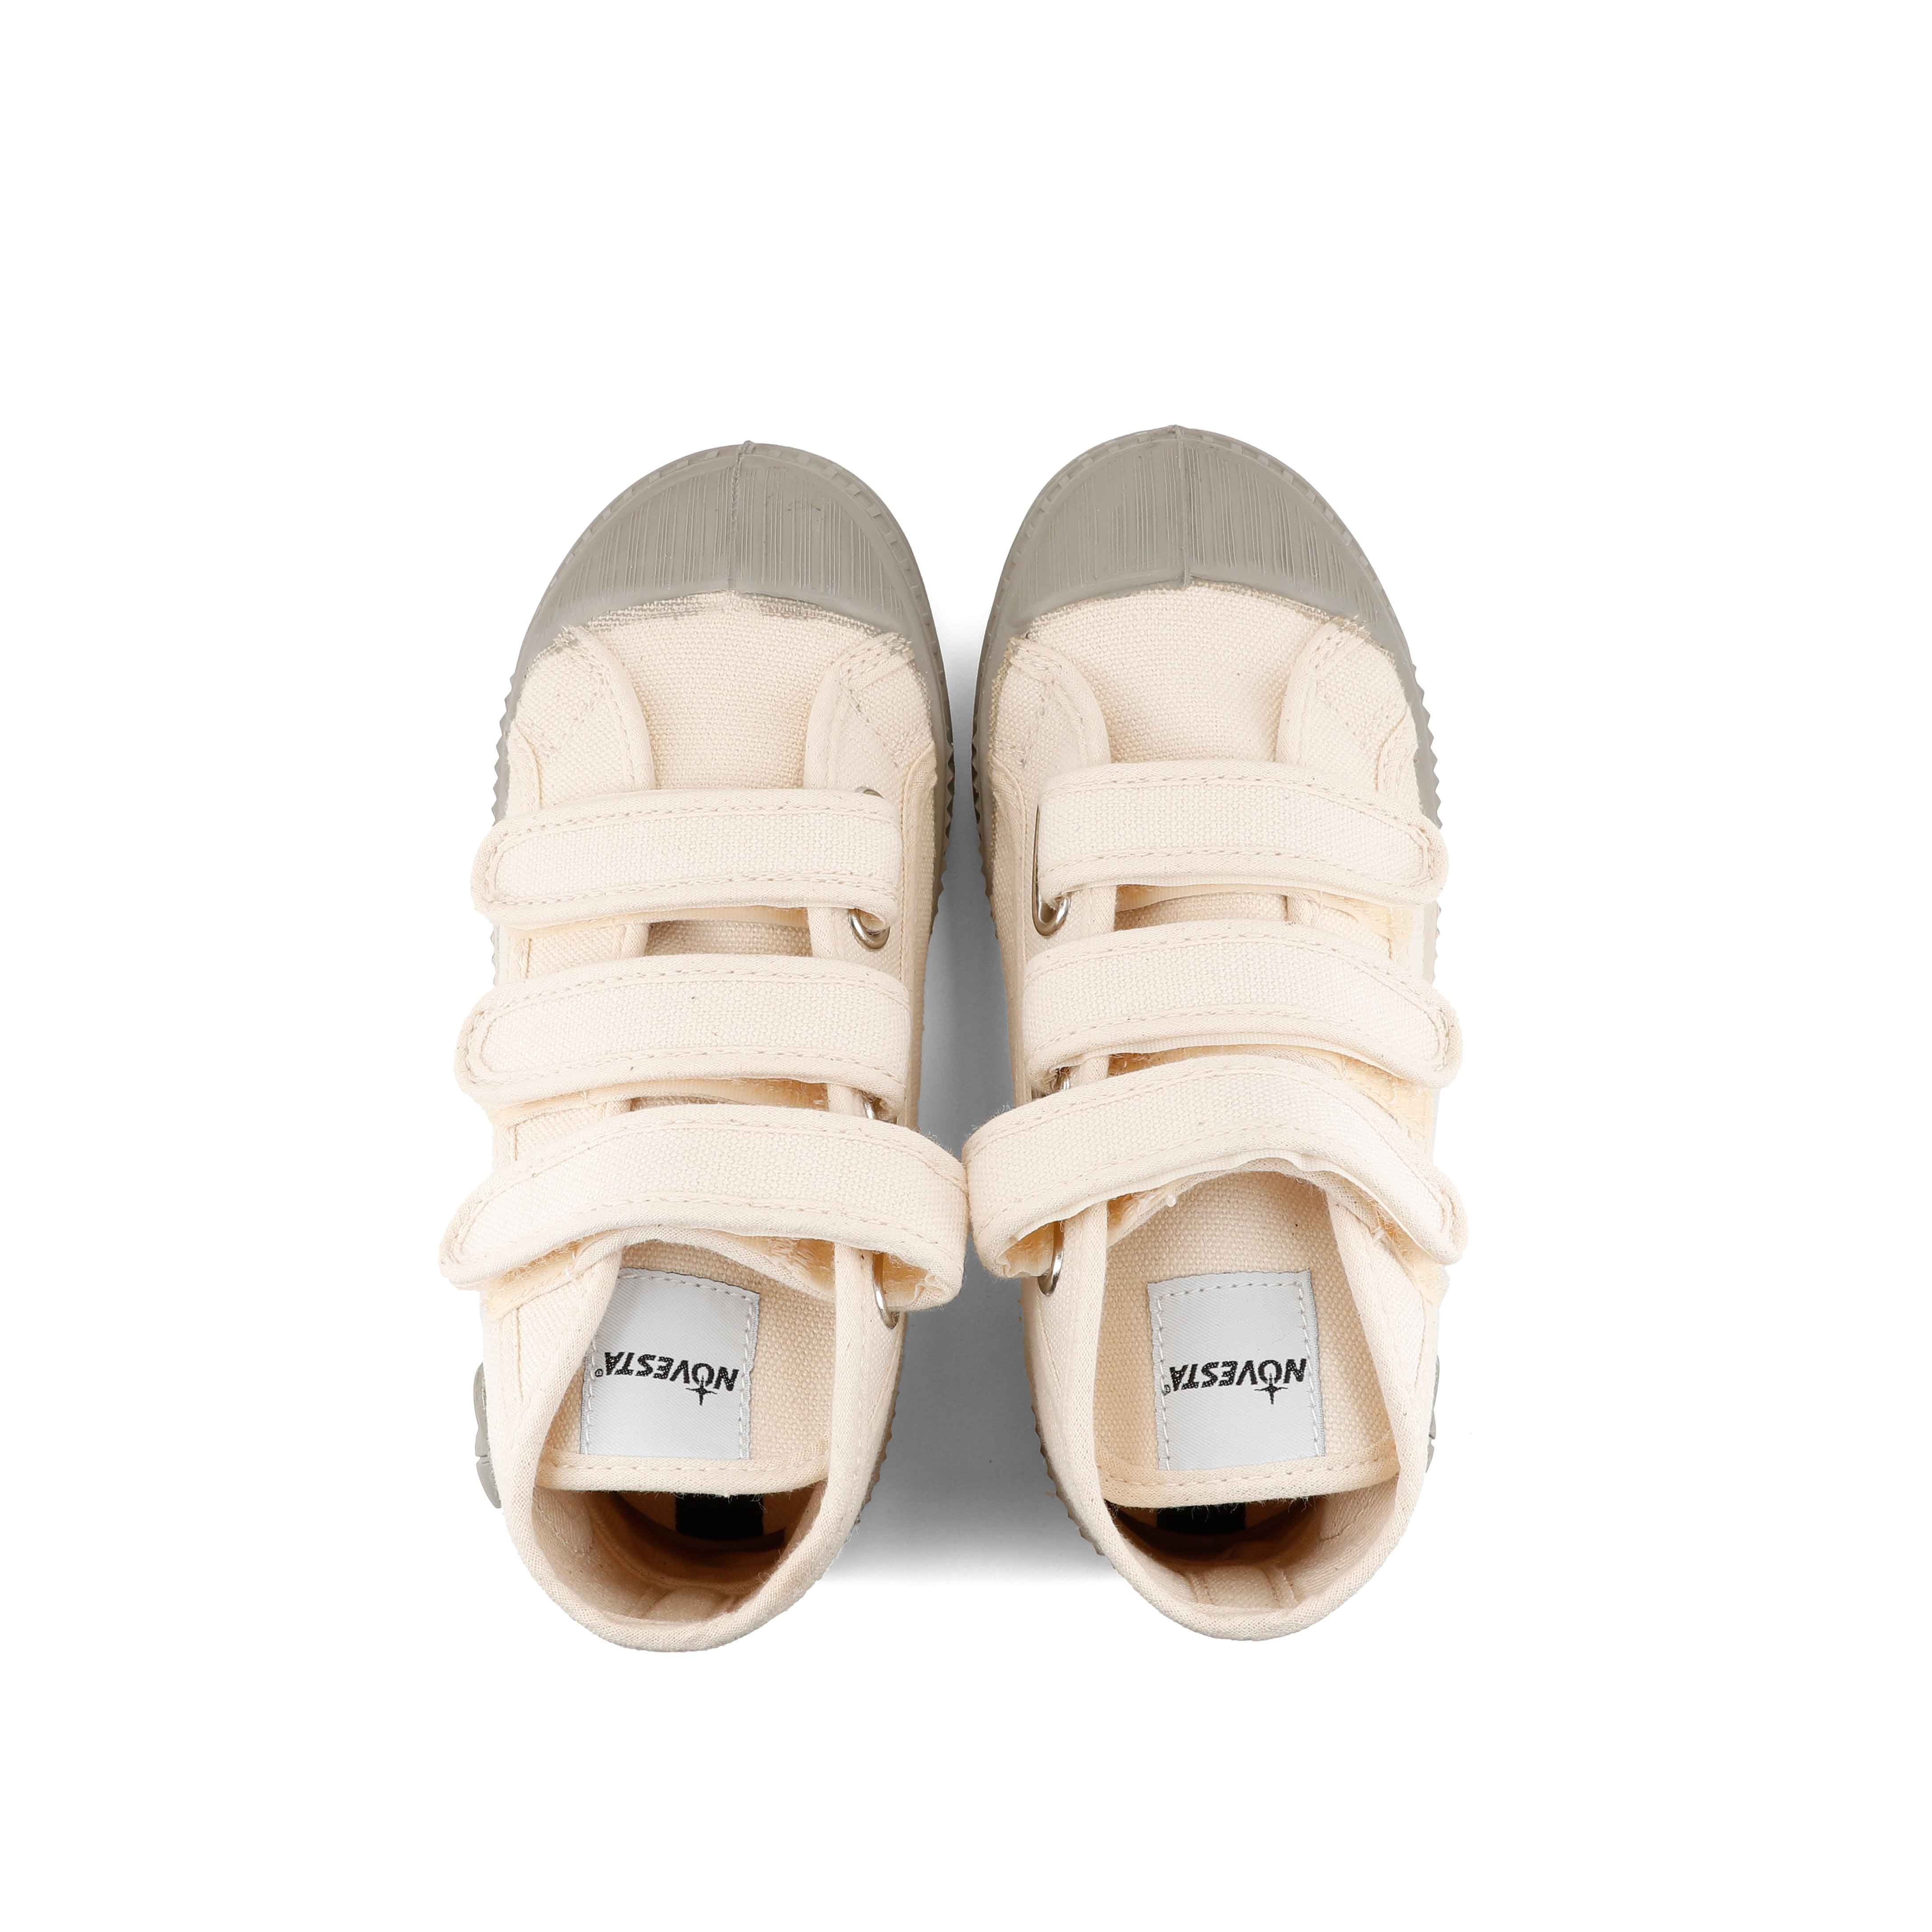 Boys & Girls White Canvas Shoes